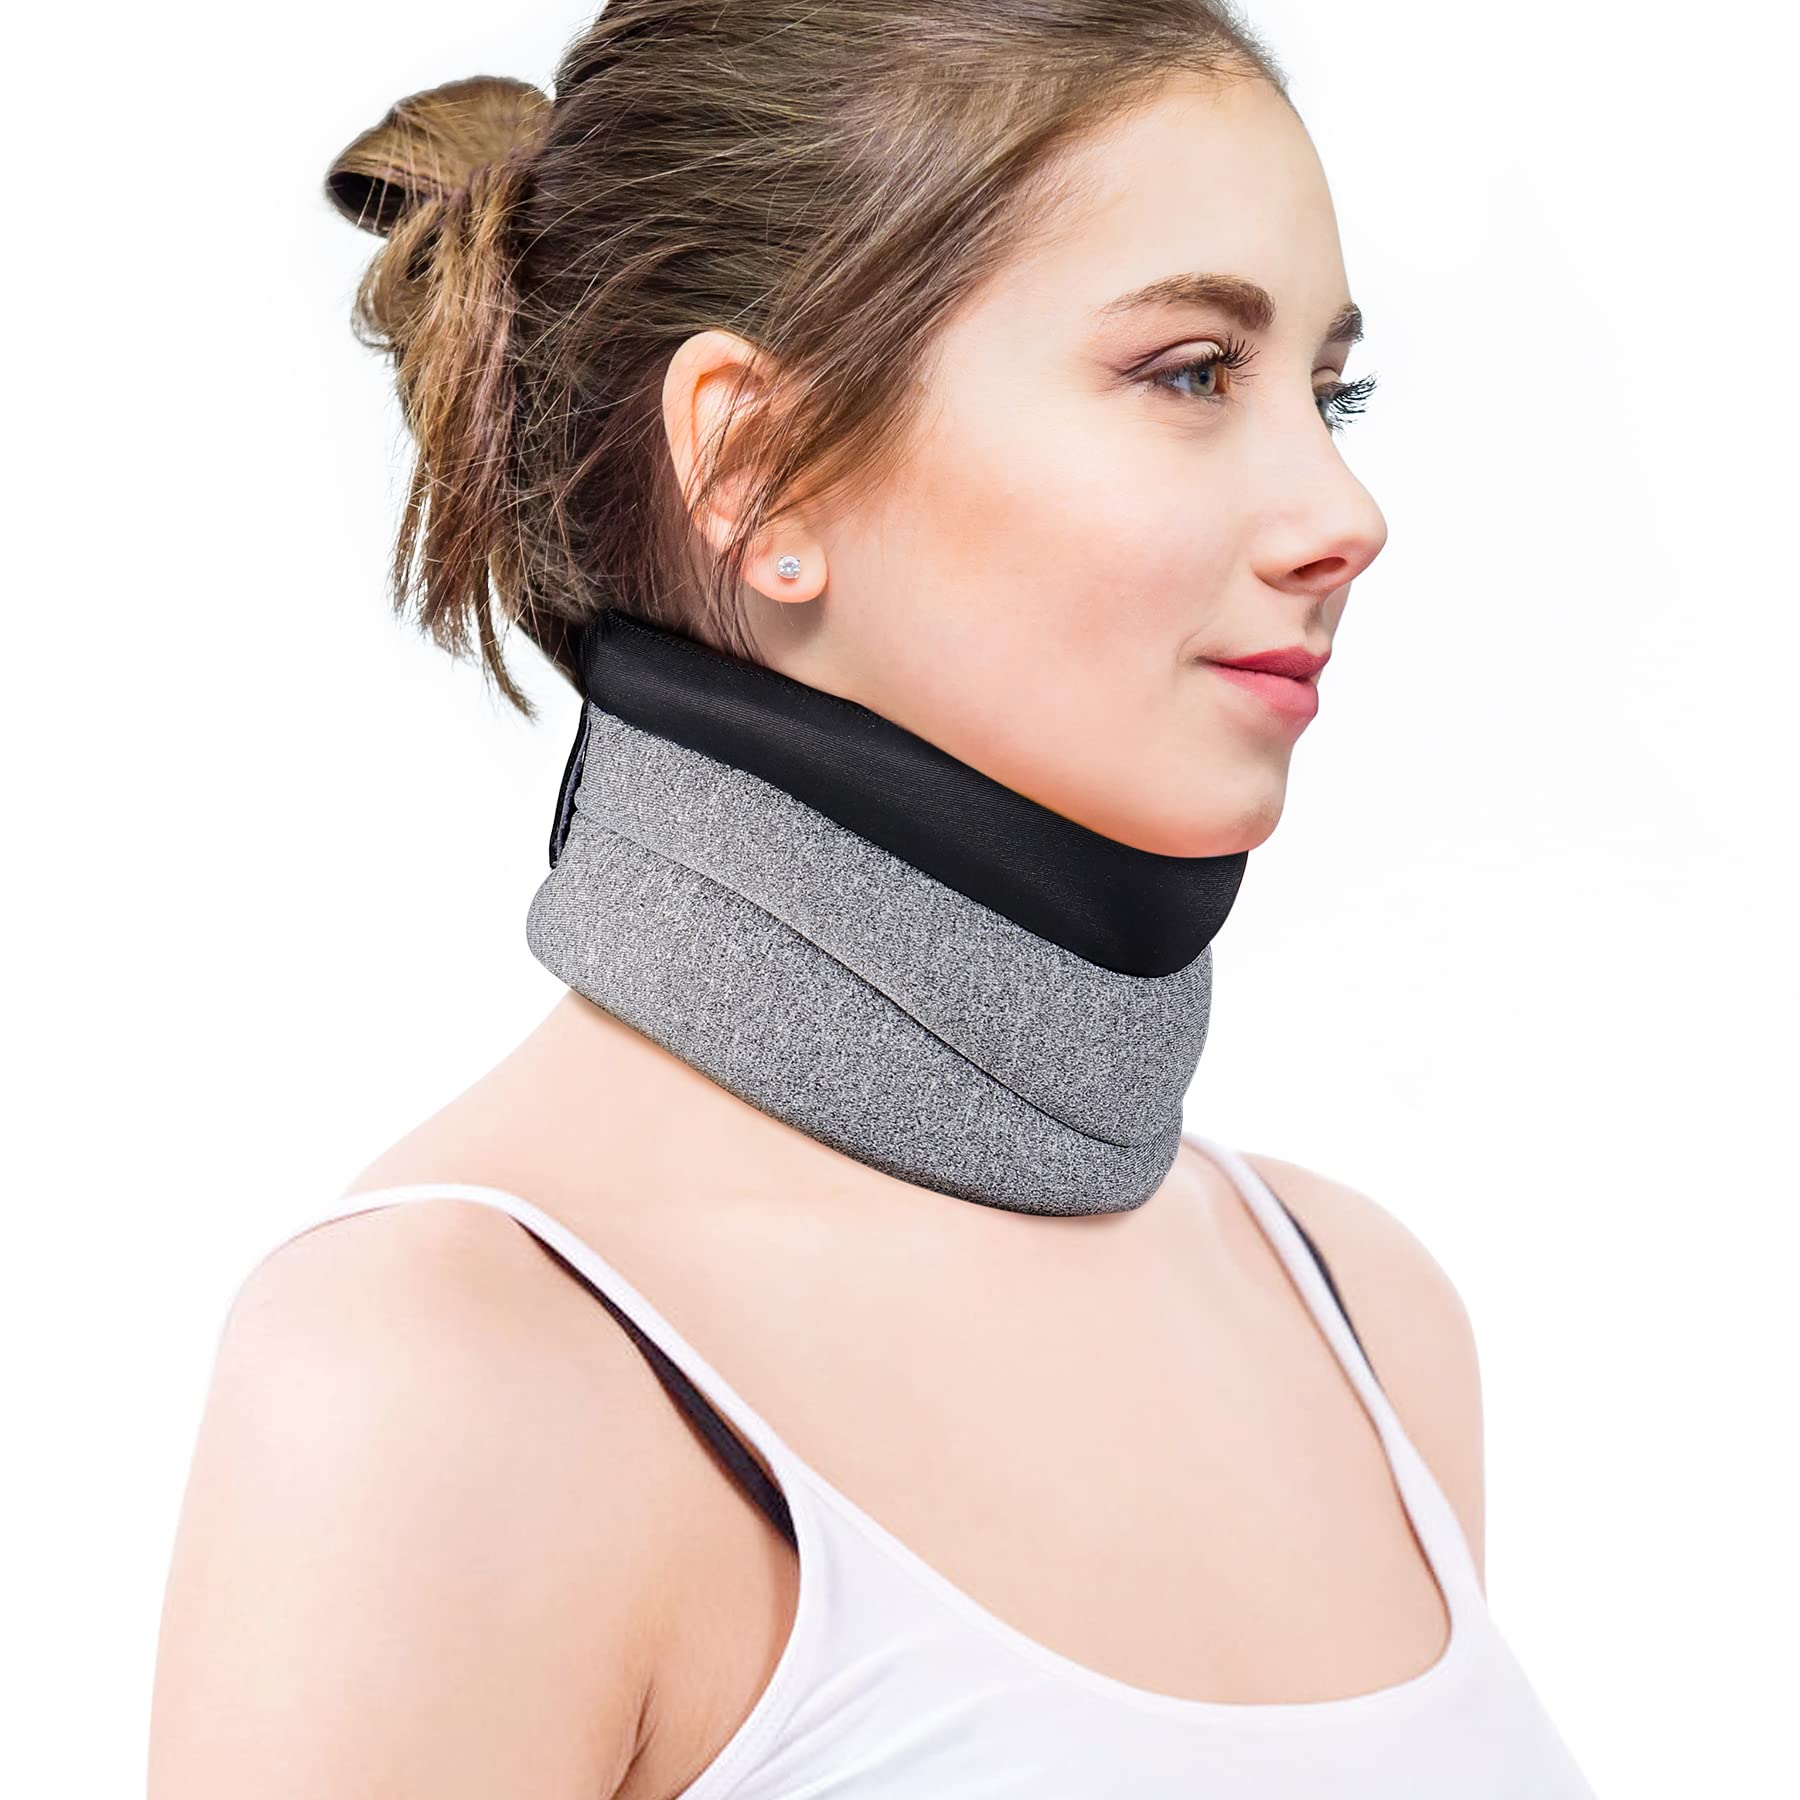 Neck Brace for Neck Pain and Support, Soft Cervical Collar for